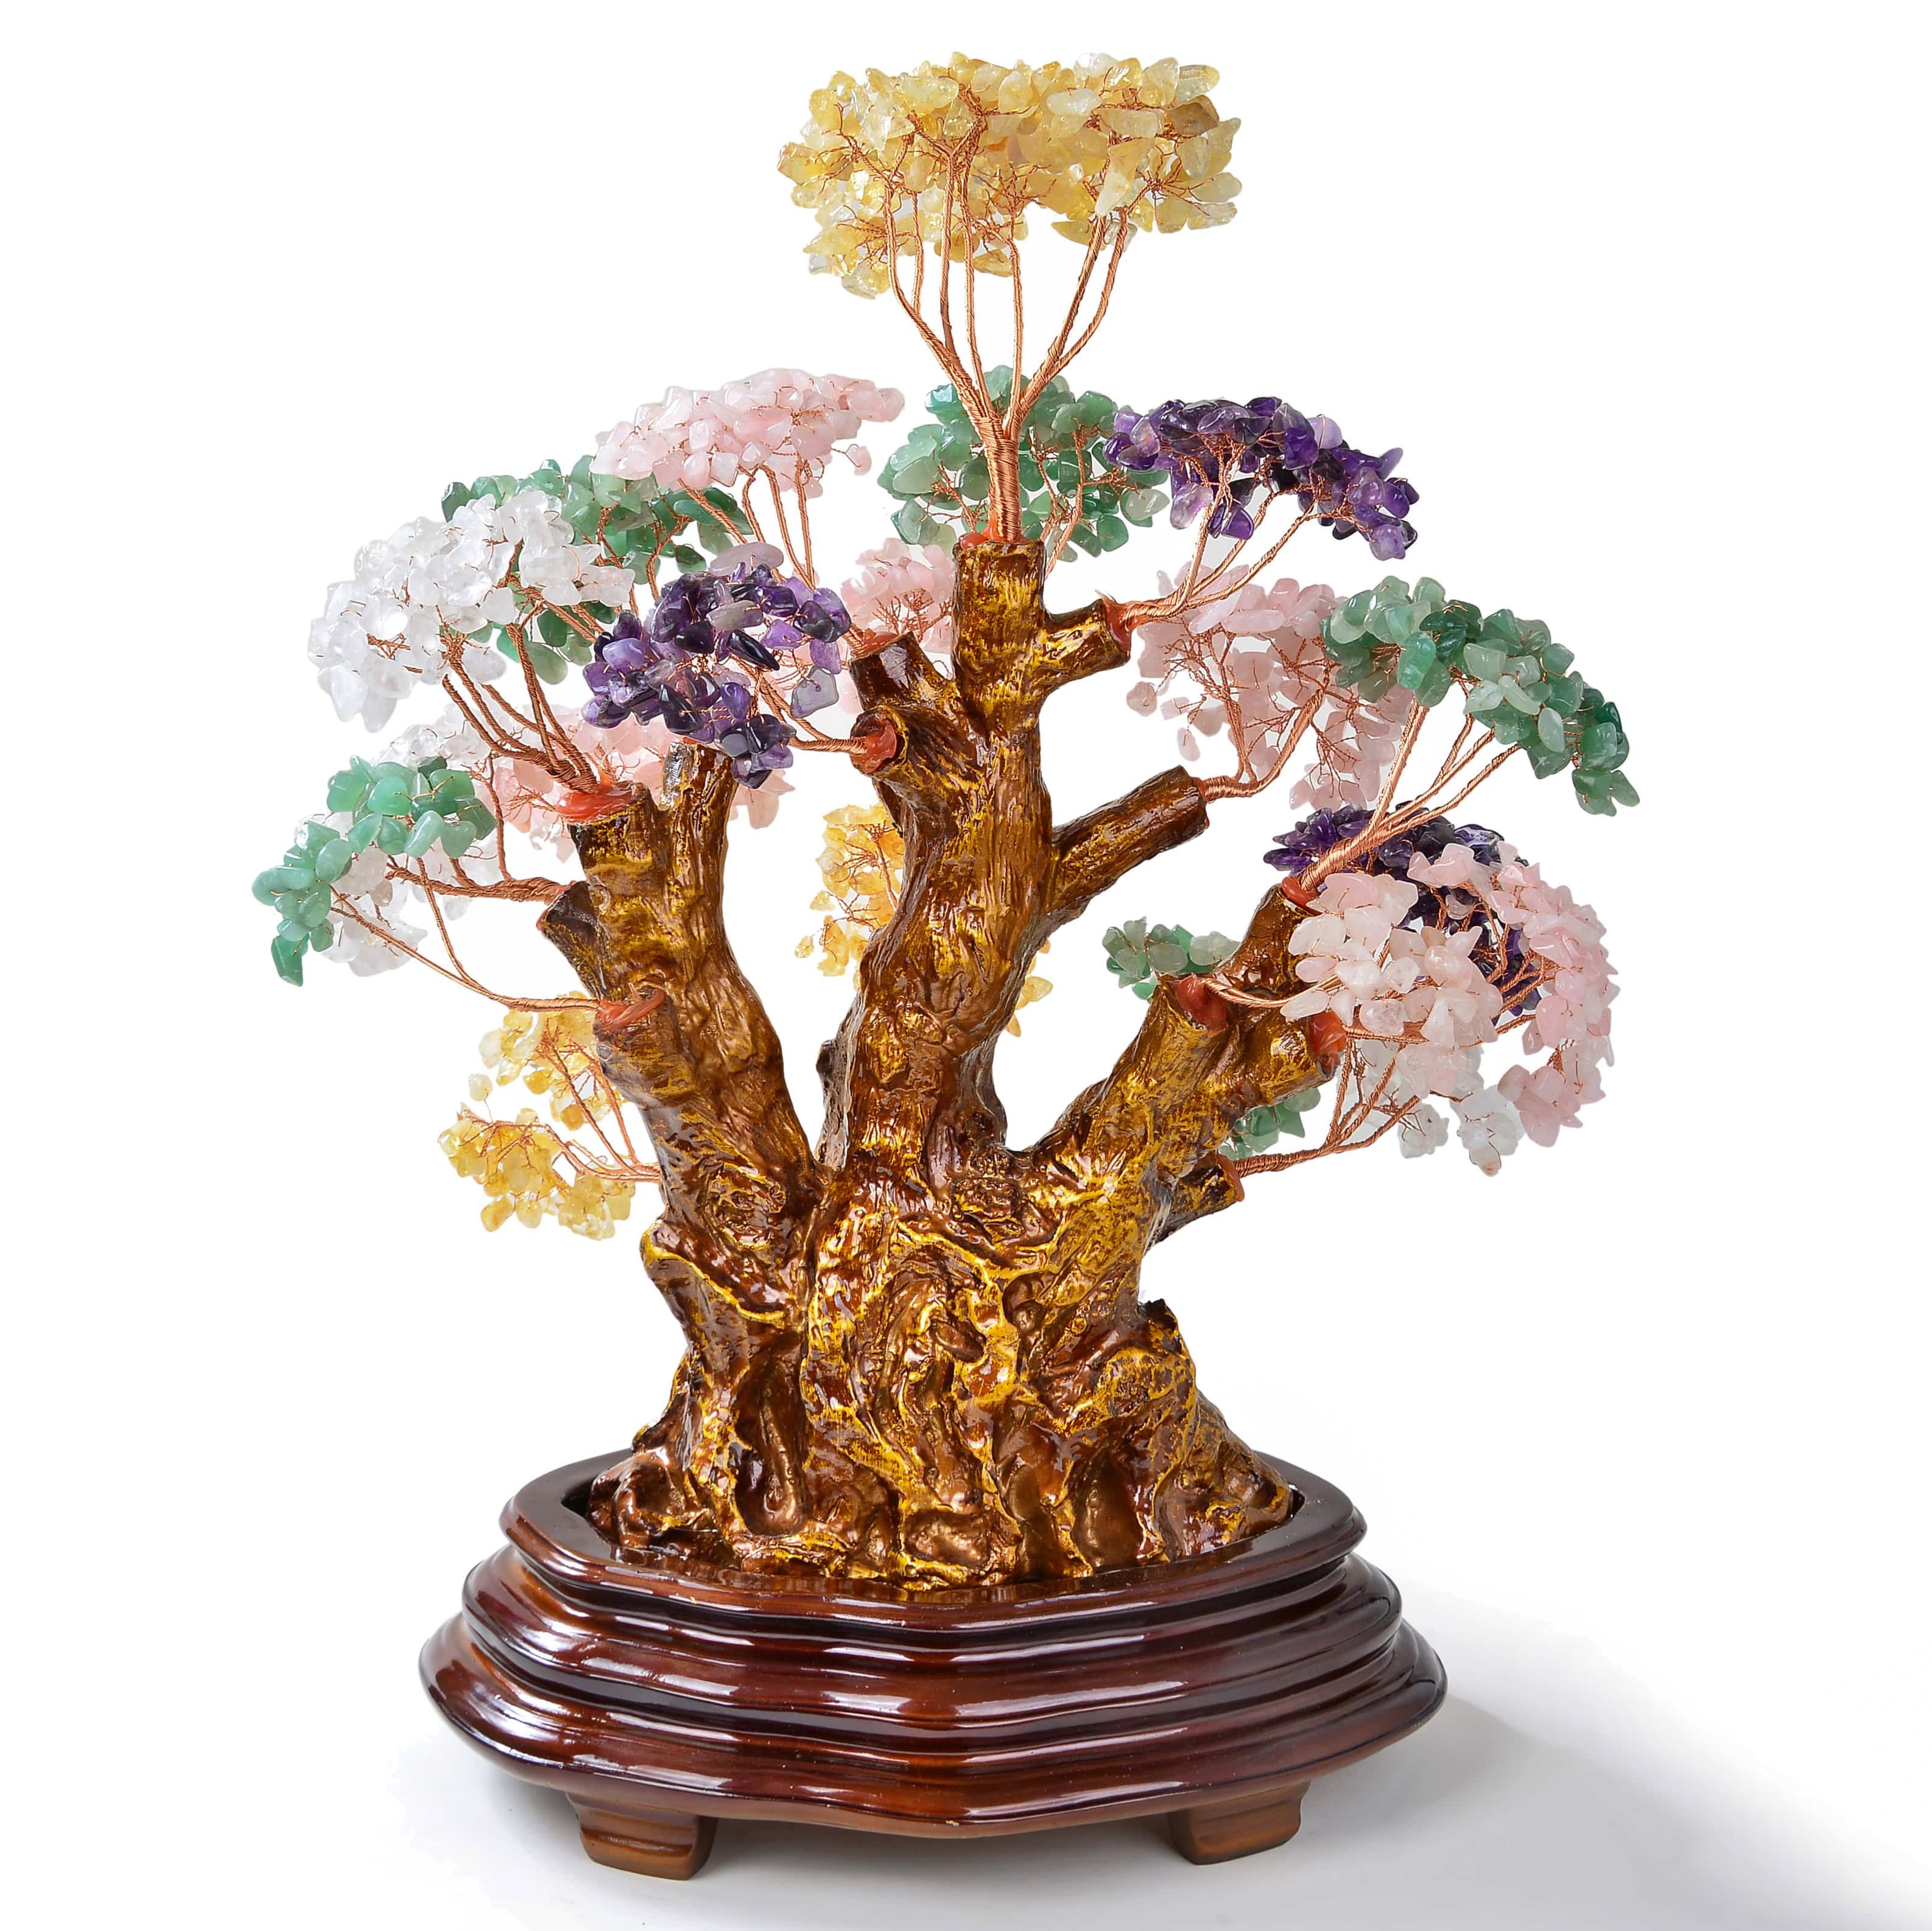 Kalifano Gemstone Trees Multi-Gemstone Tree of Life Centerpiece with over 2,000 Natural Stones K9800-MT